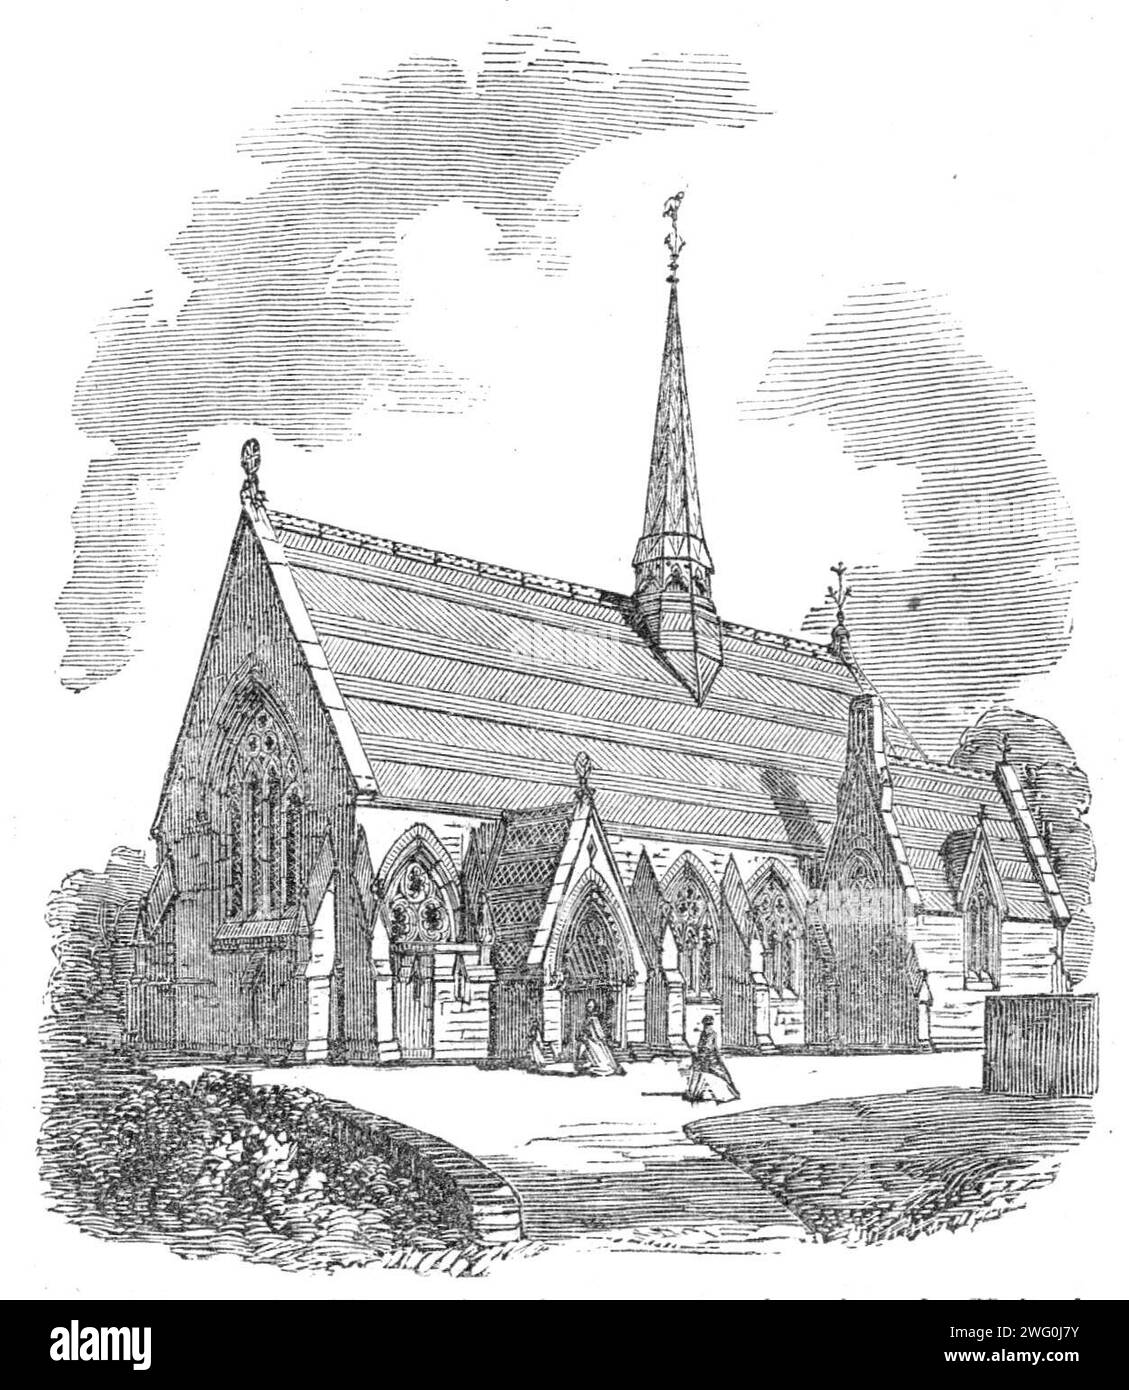 Rosslyn-Hill Chapel, Pilgrim-Lane, Hampstead, [London], 1862. 'The accompanying illustration gives a perspective view of a Unitarian chapel lately erected in Pilgrim-lane, Hampstead, a short distance from the Heath. The style of architecture is Gothic of the Early Decorated period; the material employed is Hassock stone, faced externally with Kentish rag, with dressings of Bath stone. The roof is covered with slate or bands of two colours, and the bell-turret of oak shingle. Internally the roof is of one span, with curved braces. The entrance-porch on the south side conducts to a lobby at a ri Stock Photo